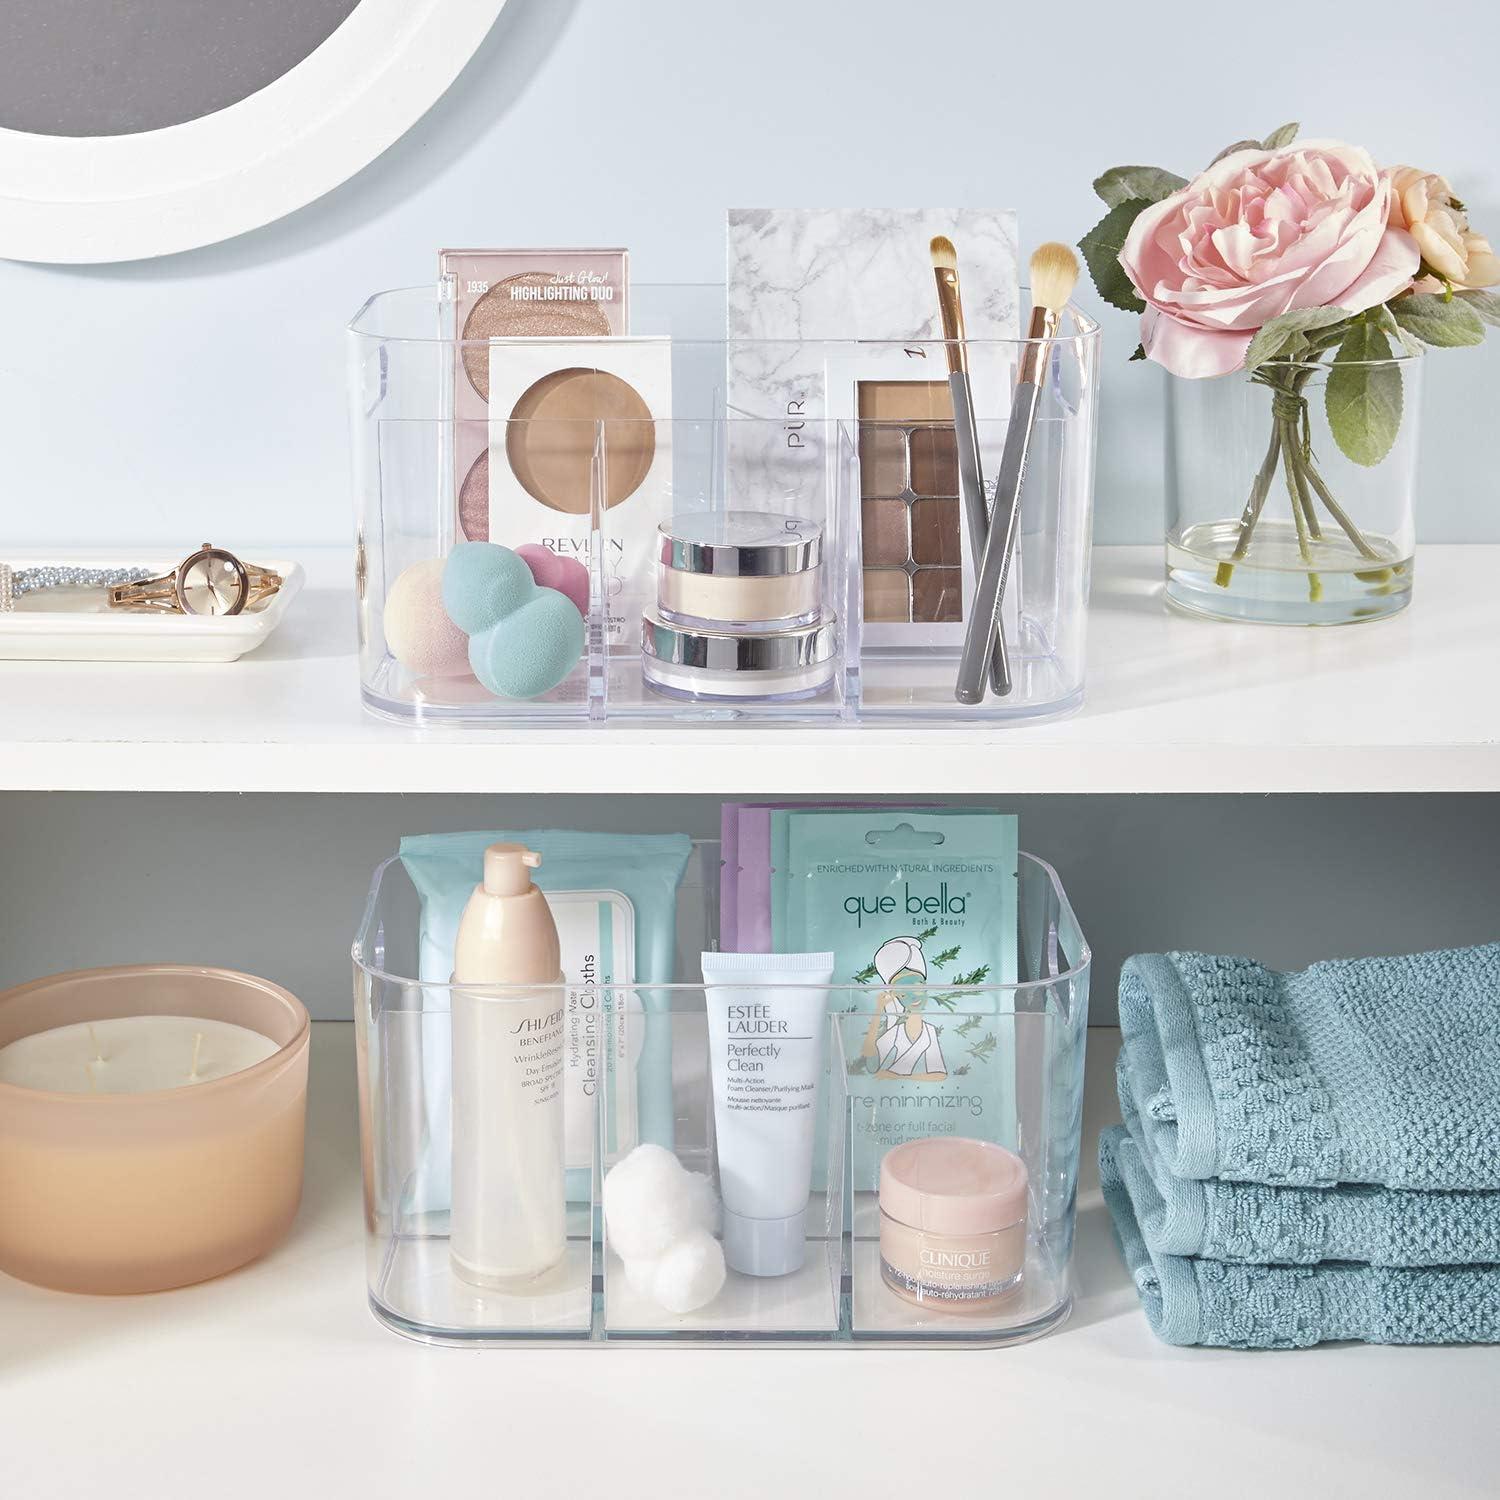 STORi Bliss 12x 8 Open Compartment Clear Plastic Organizer | Rectangular  Makeup & Vanity Container & Pantry Storage Bin with Pass-Through Handles 